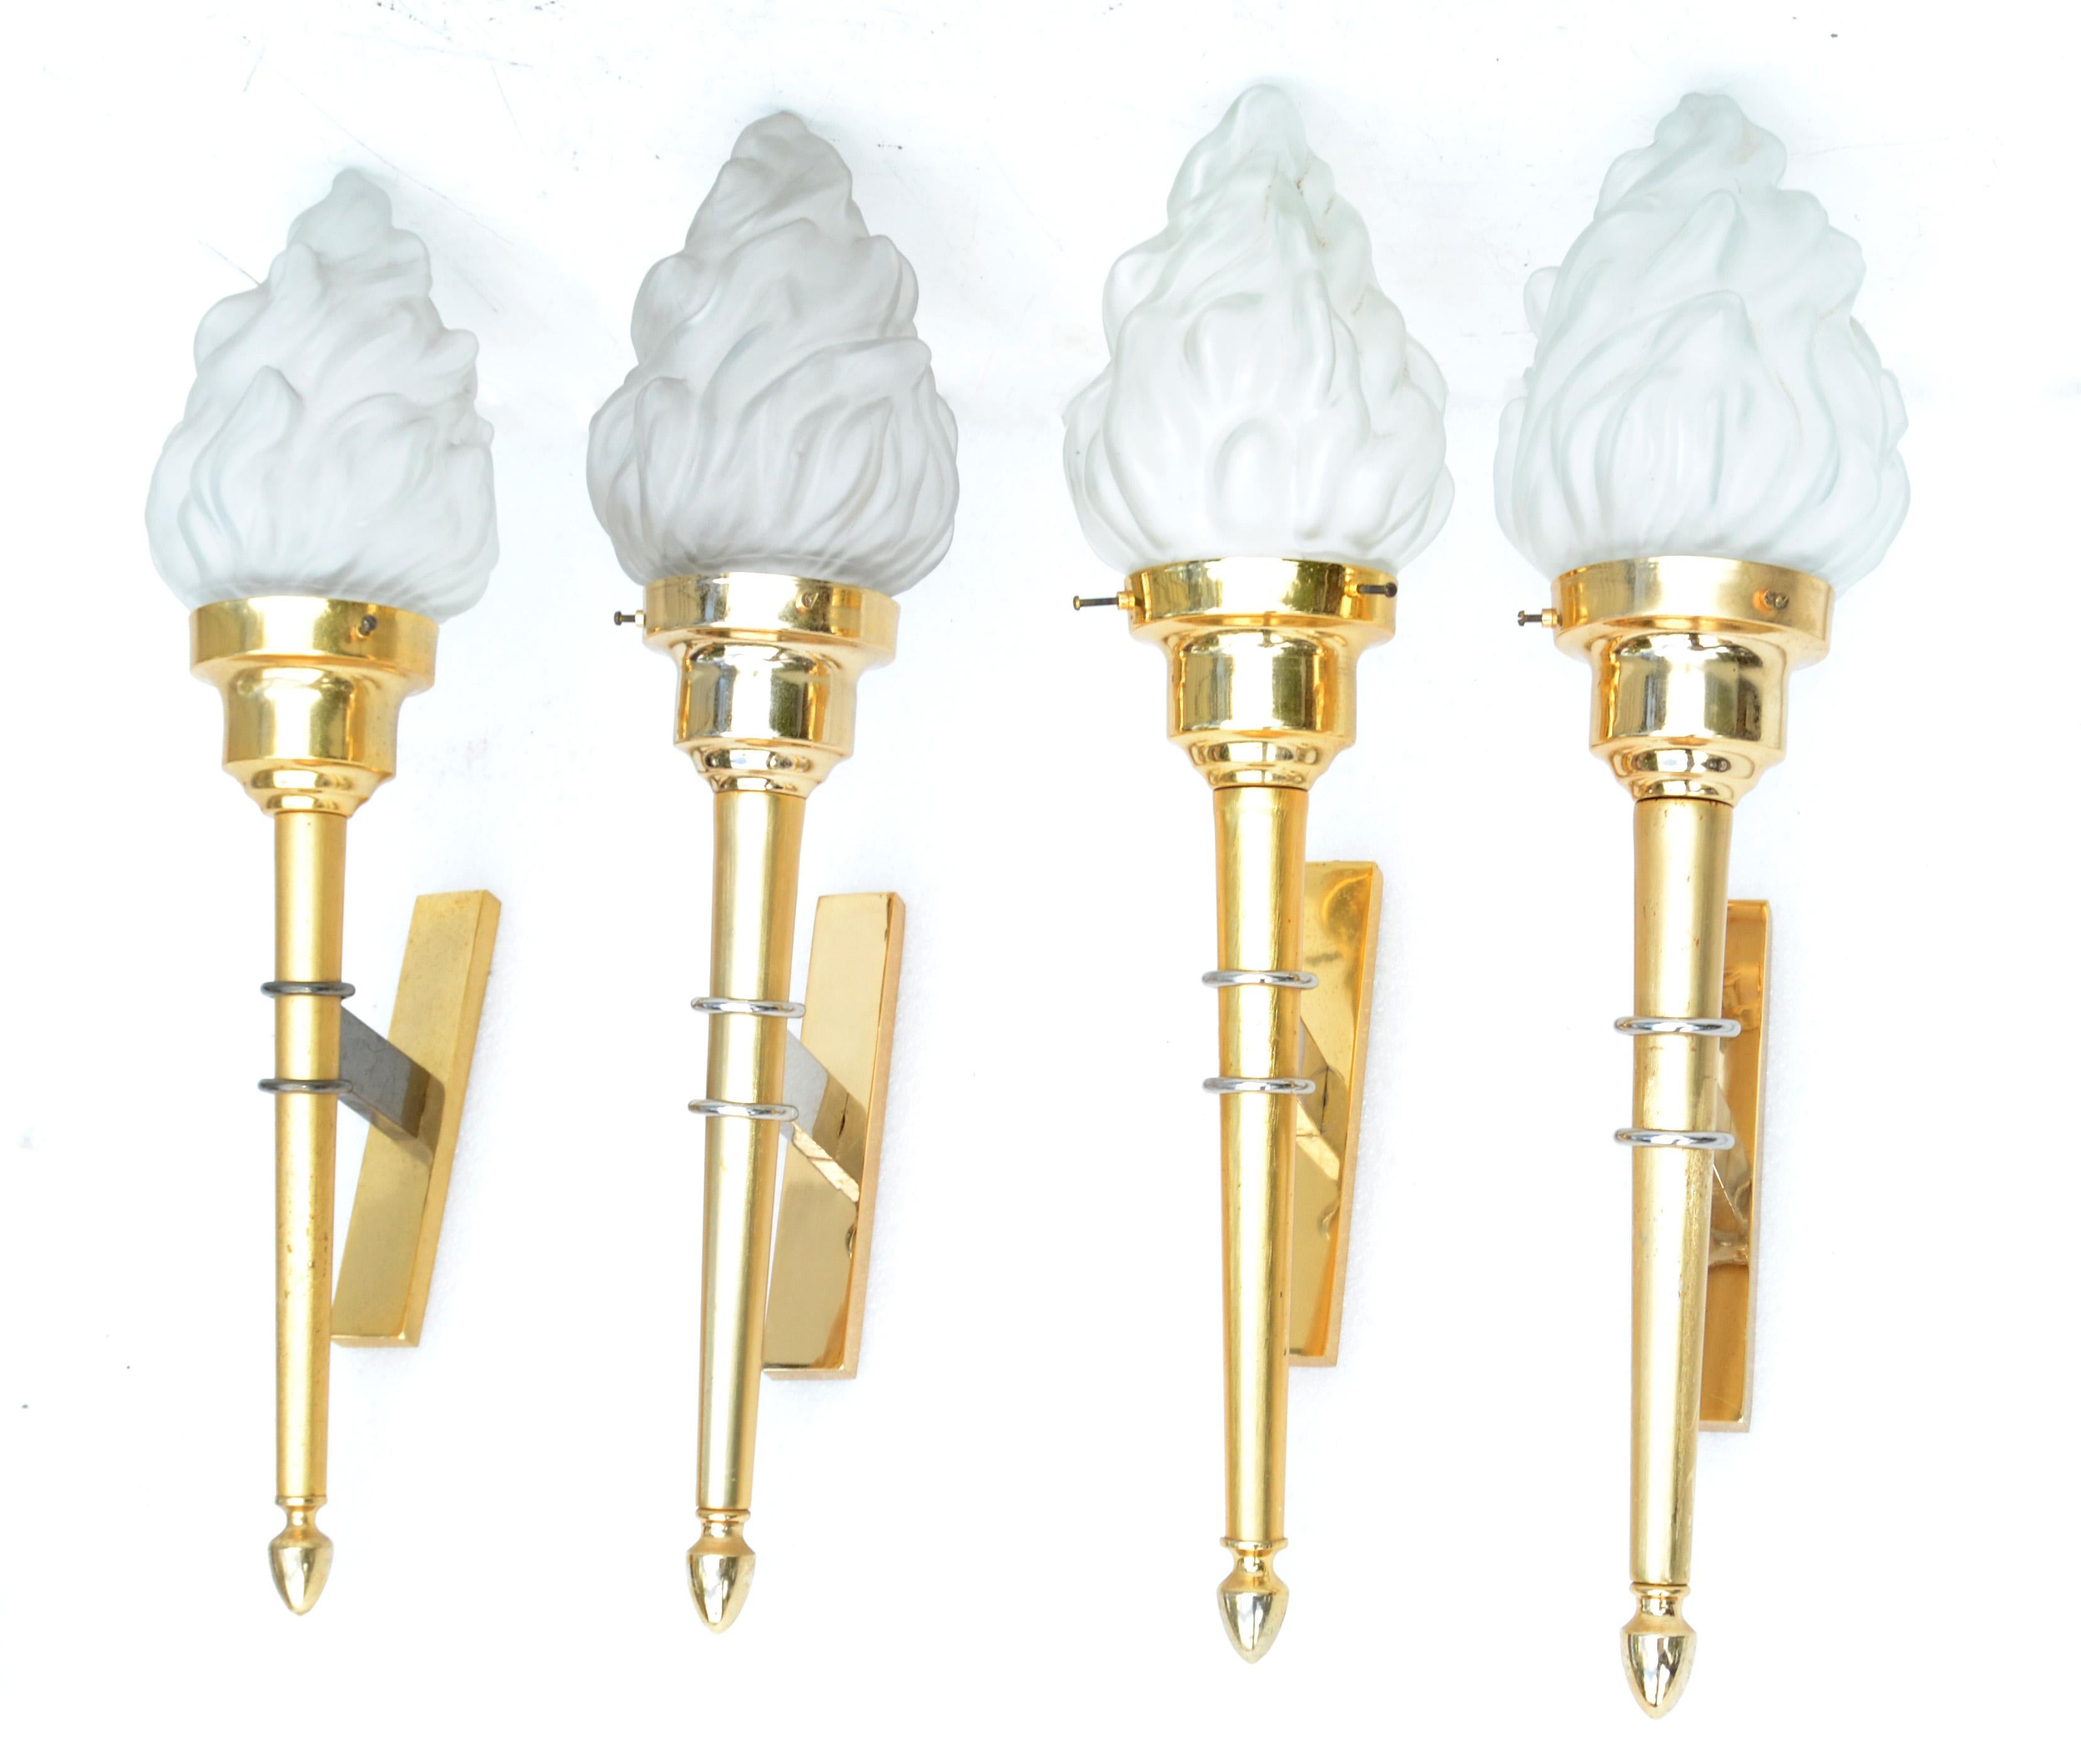 Maison Jansen Style Sconces Brass & Blown Glass Flame Shade France 1950, Pair For Sale 7